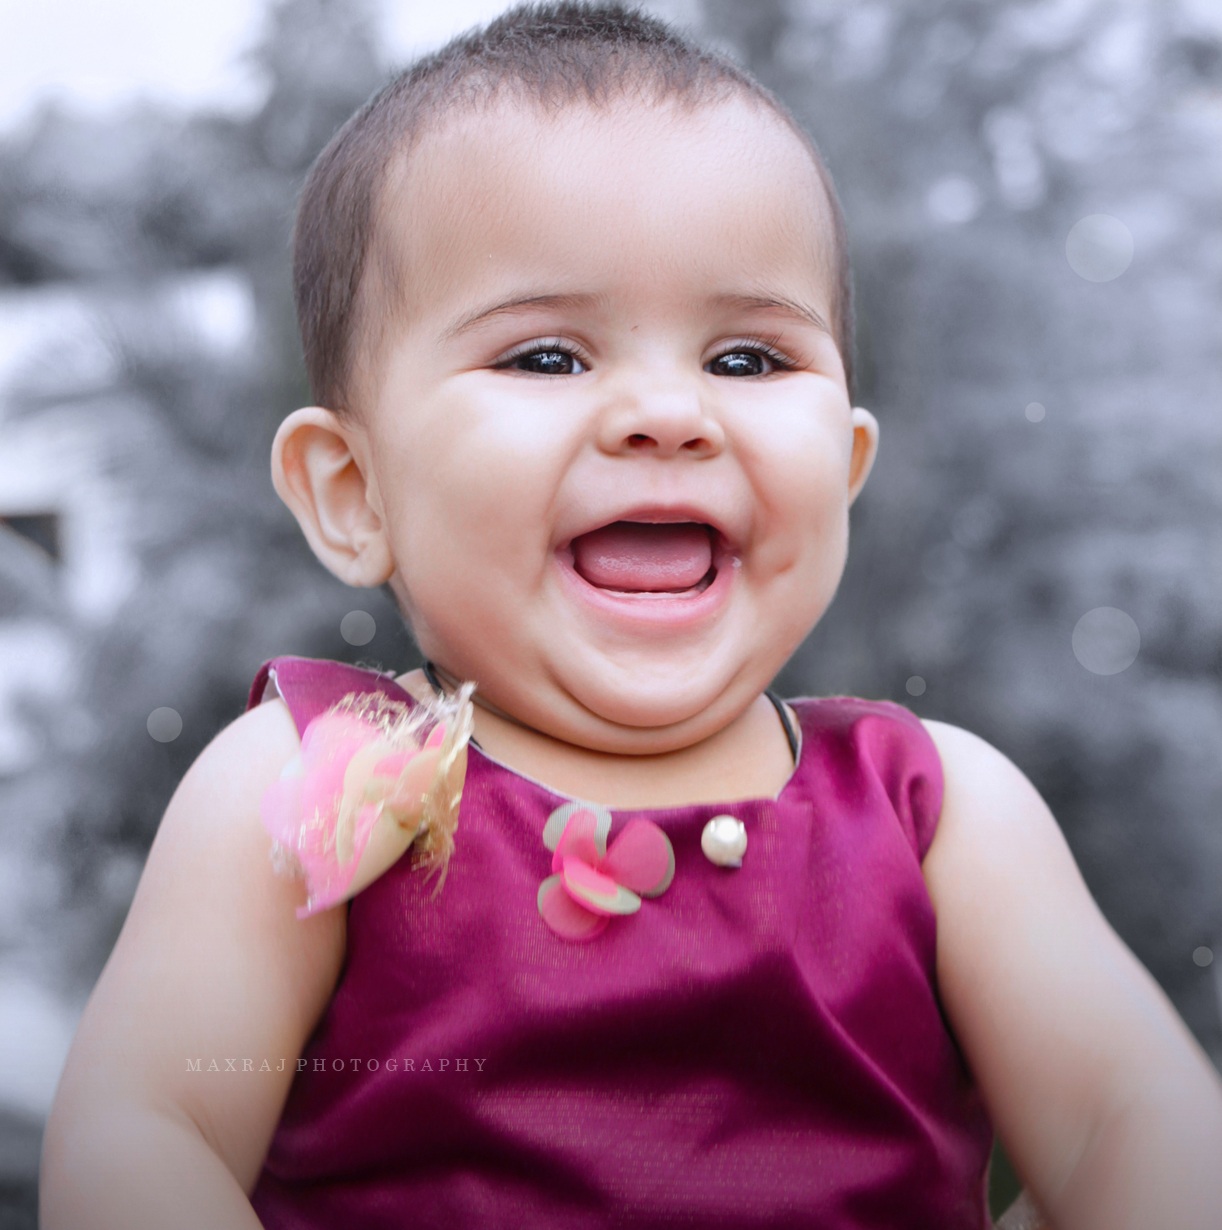 smiling baby pictures, best baby photographer in india, baby photographer in pune